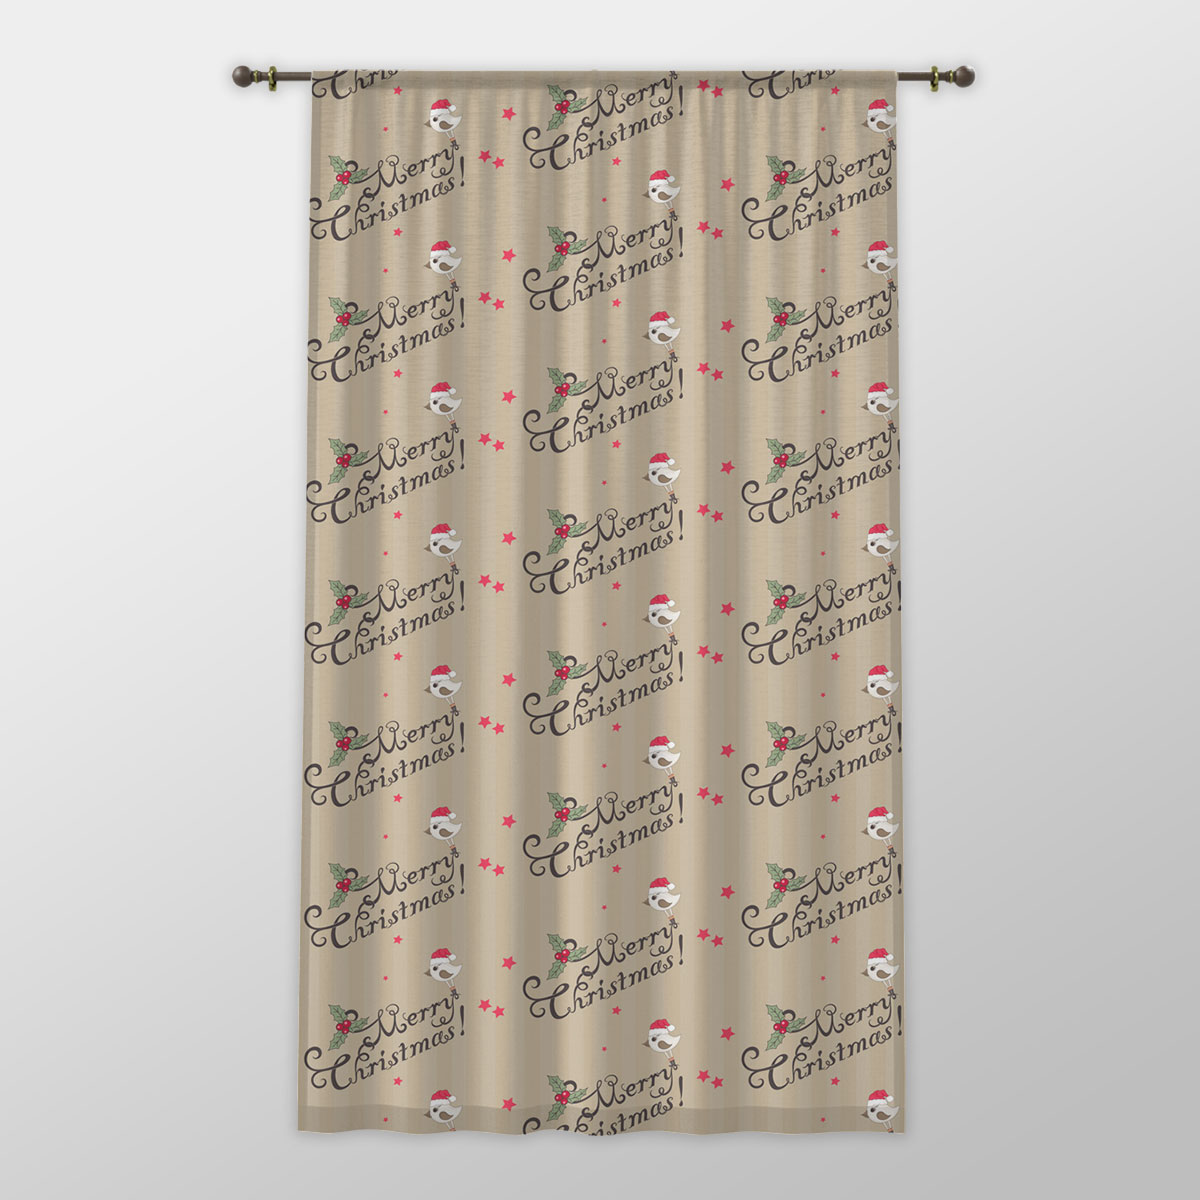 Merry Christmas With Cardinal Bird And Holly Leaf One-side Printed Window Curtain